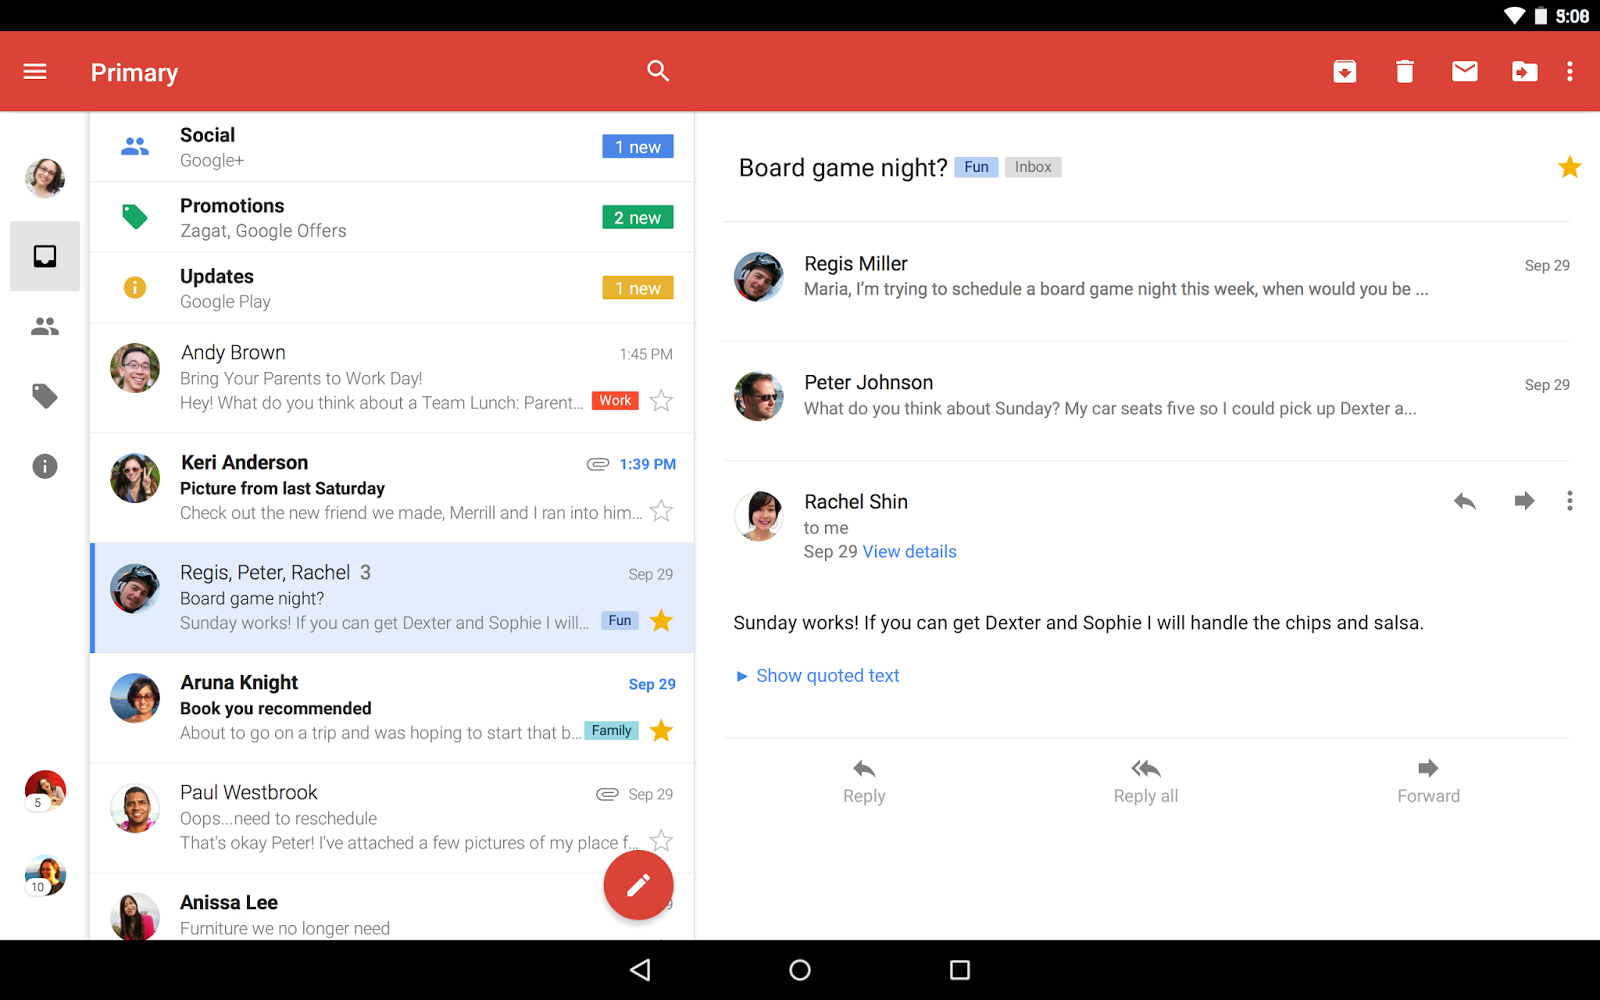 Gmail 5.0 with 'Material Design' and Multiple Email Account Support Now Officially ...